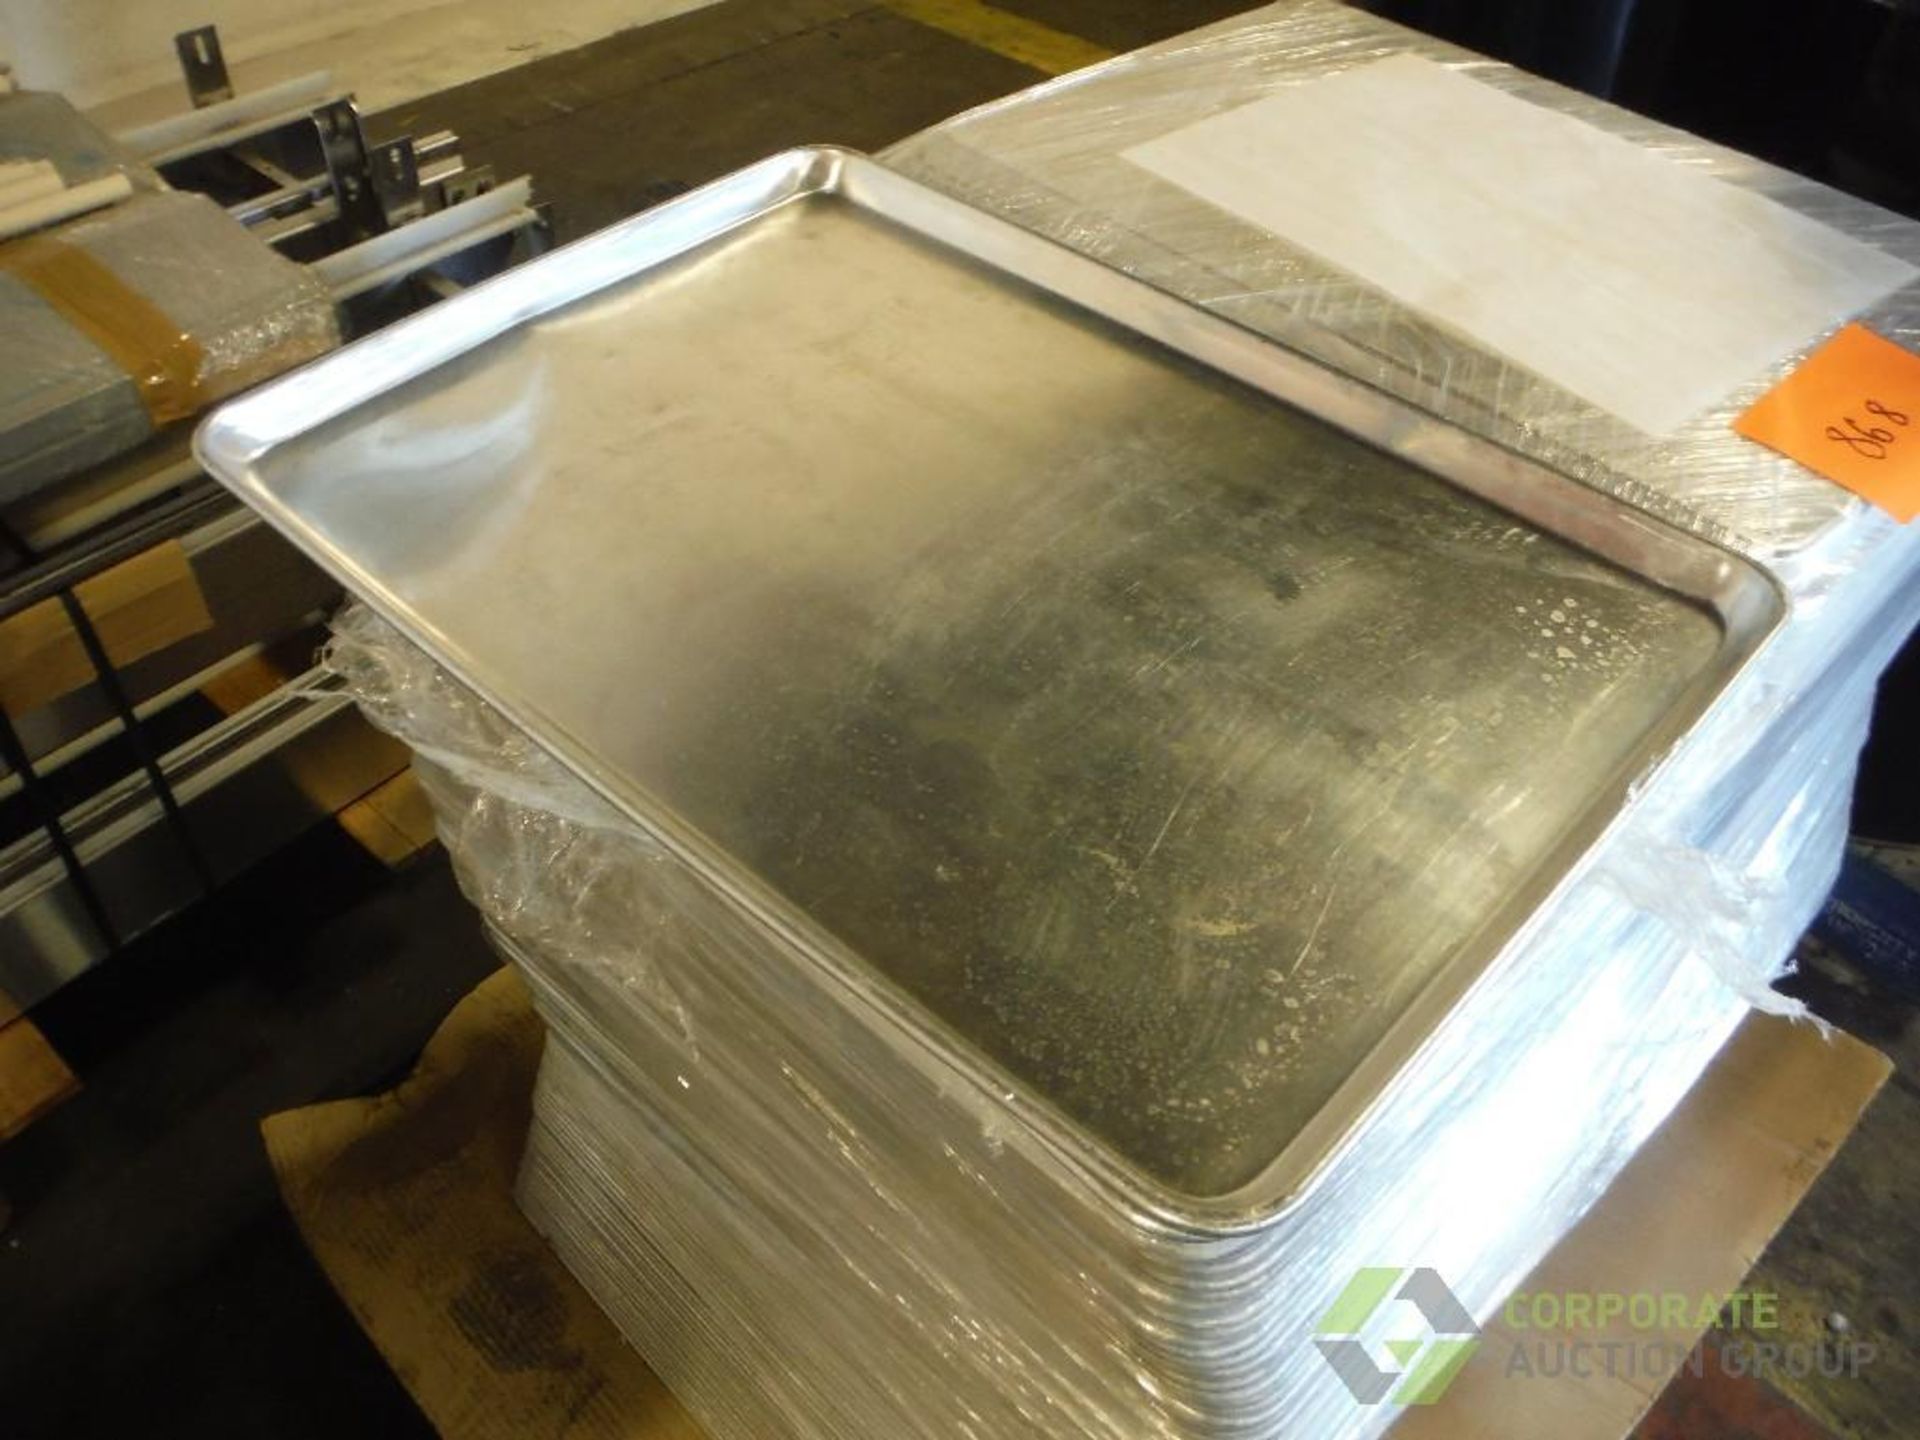 New sheet pans, 26 in. x 18 in., approx. 200 (LOT) - Image 2 of 3